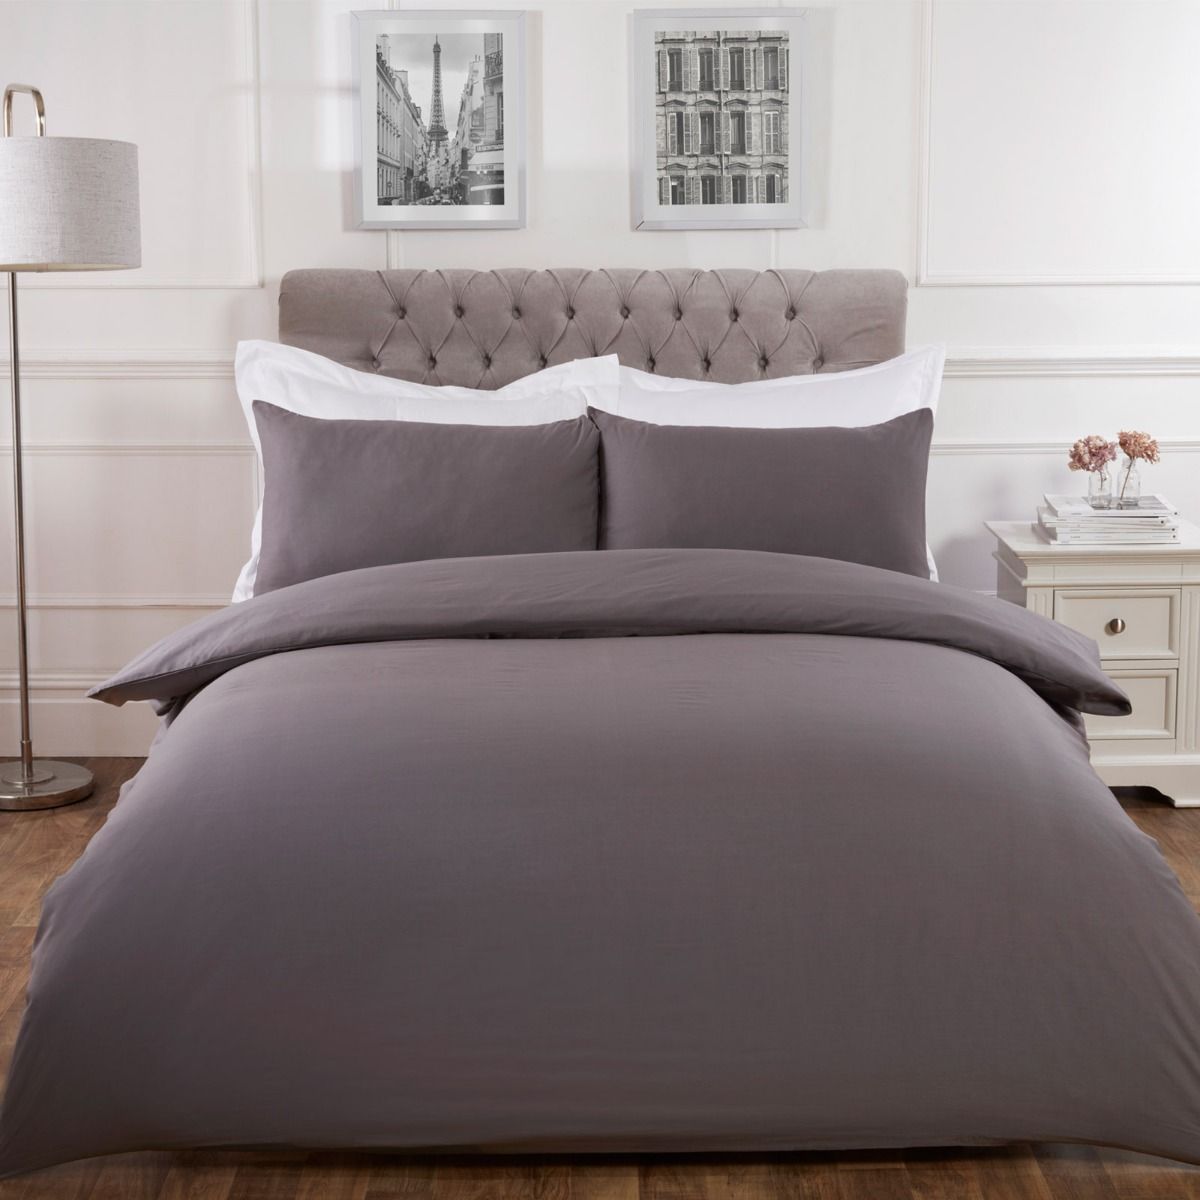 Highams Easy Care Polycotton Duvet Cover Set - Charcoal Grey